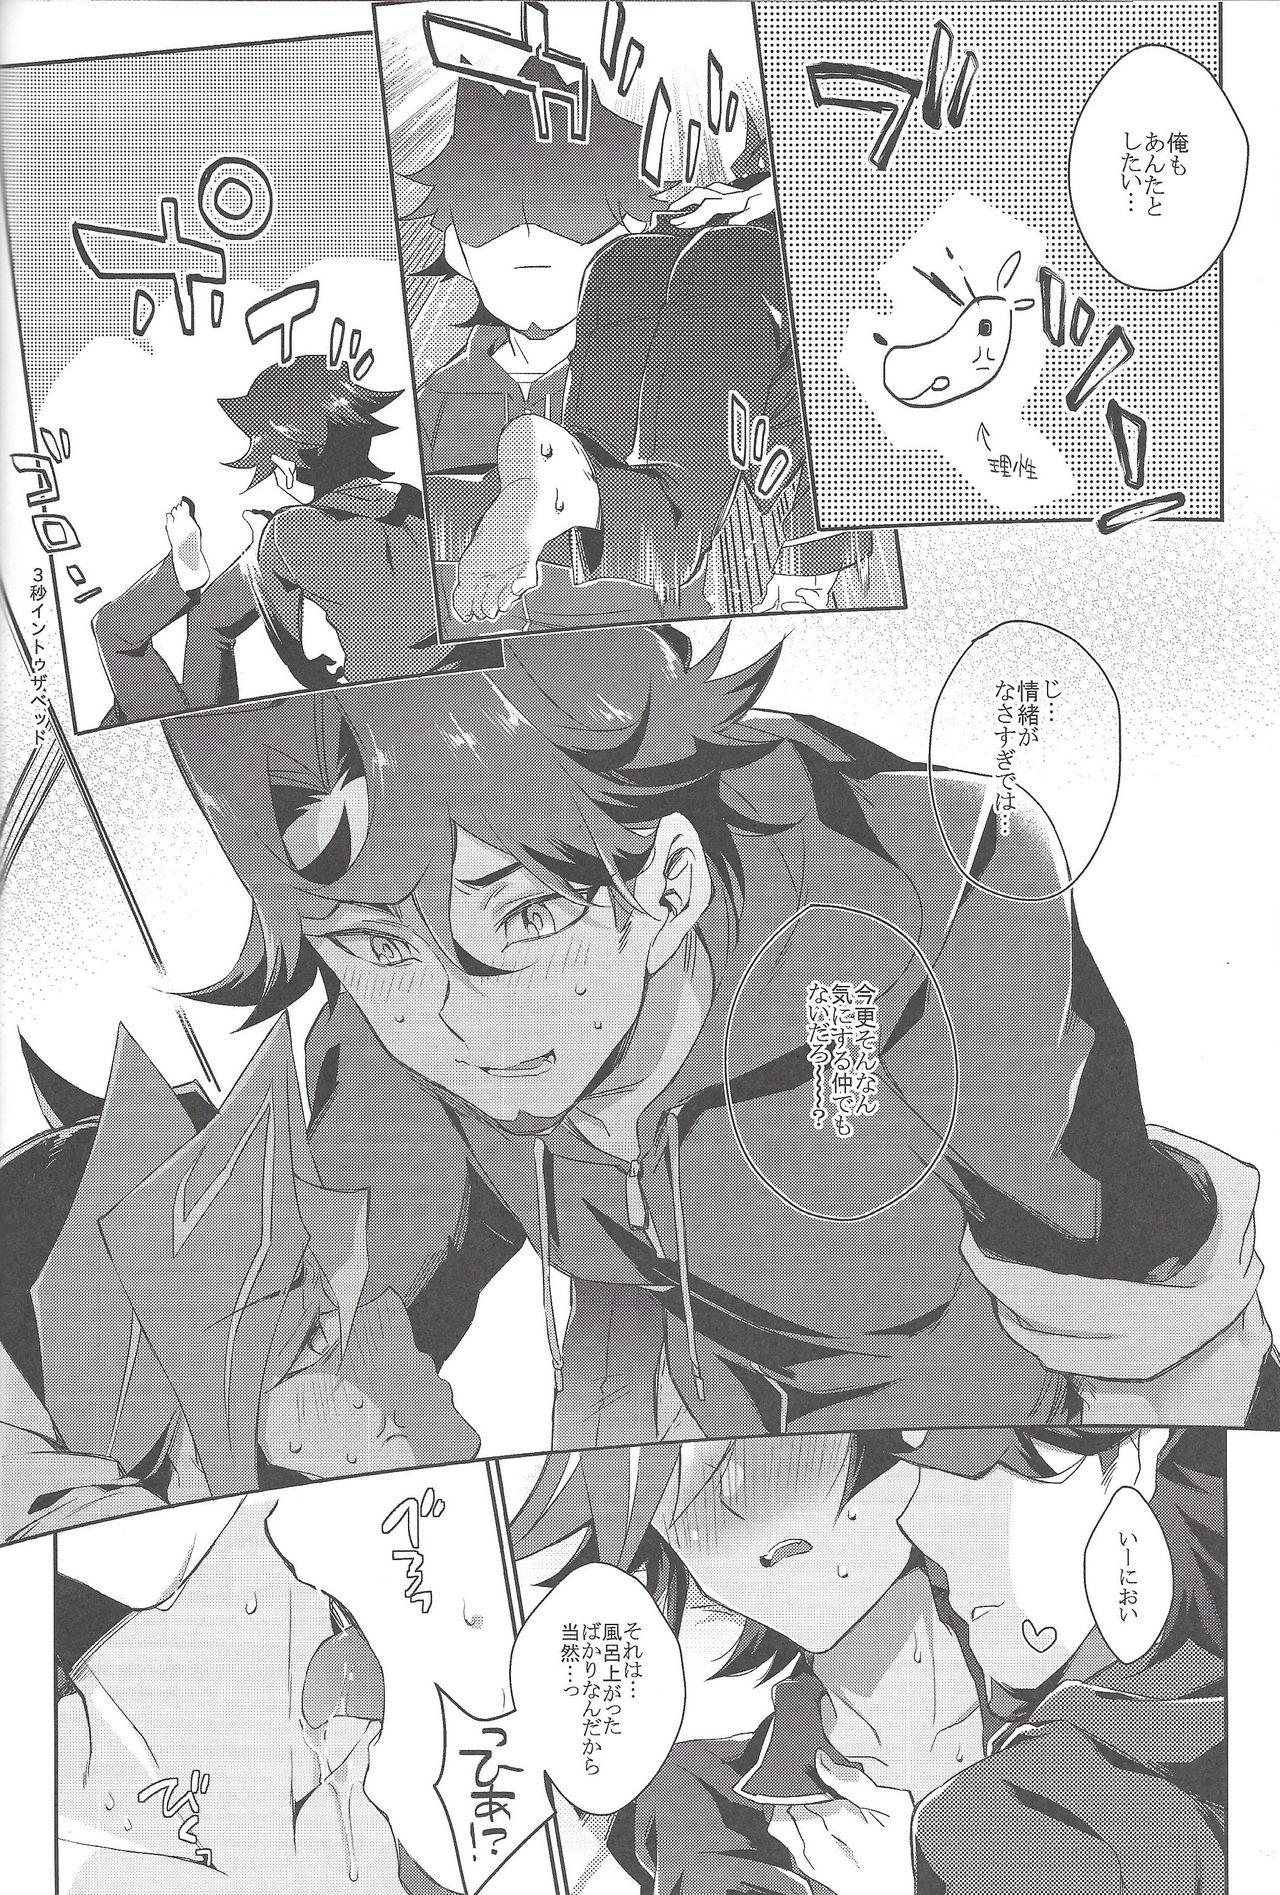 Teenfuns LOVE LINK - Yu-gi-oh vrains 4some - Page 7